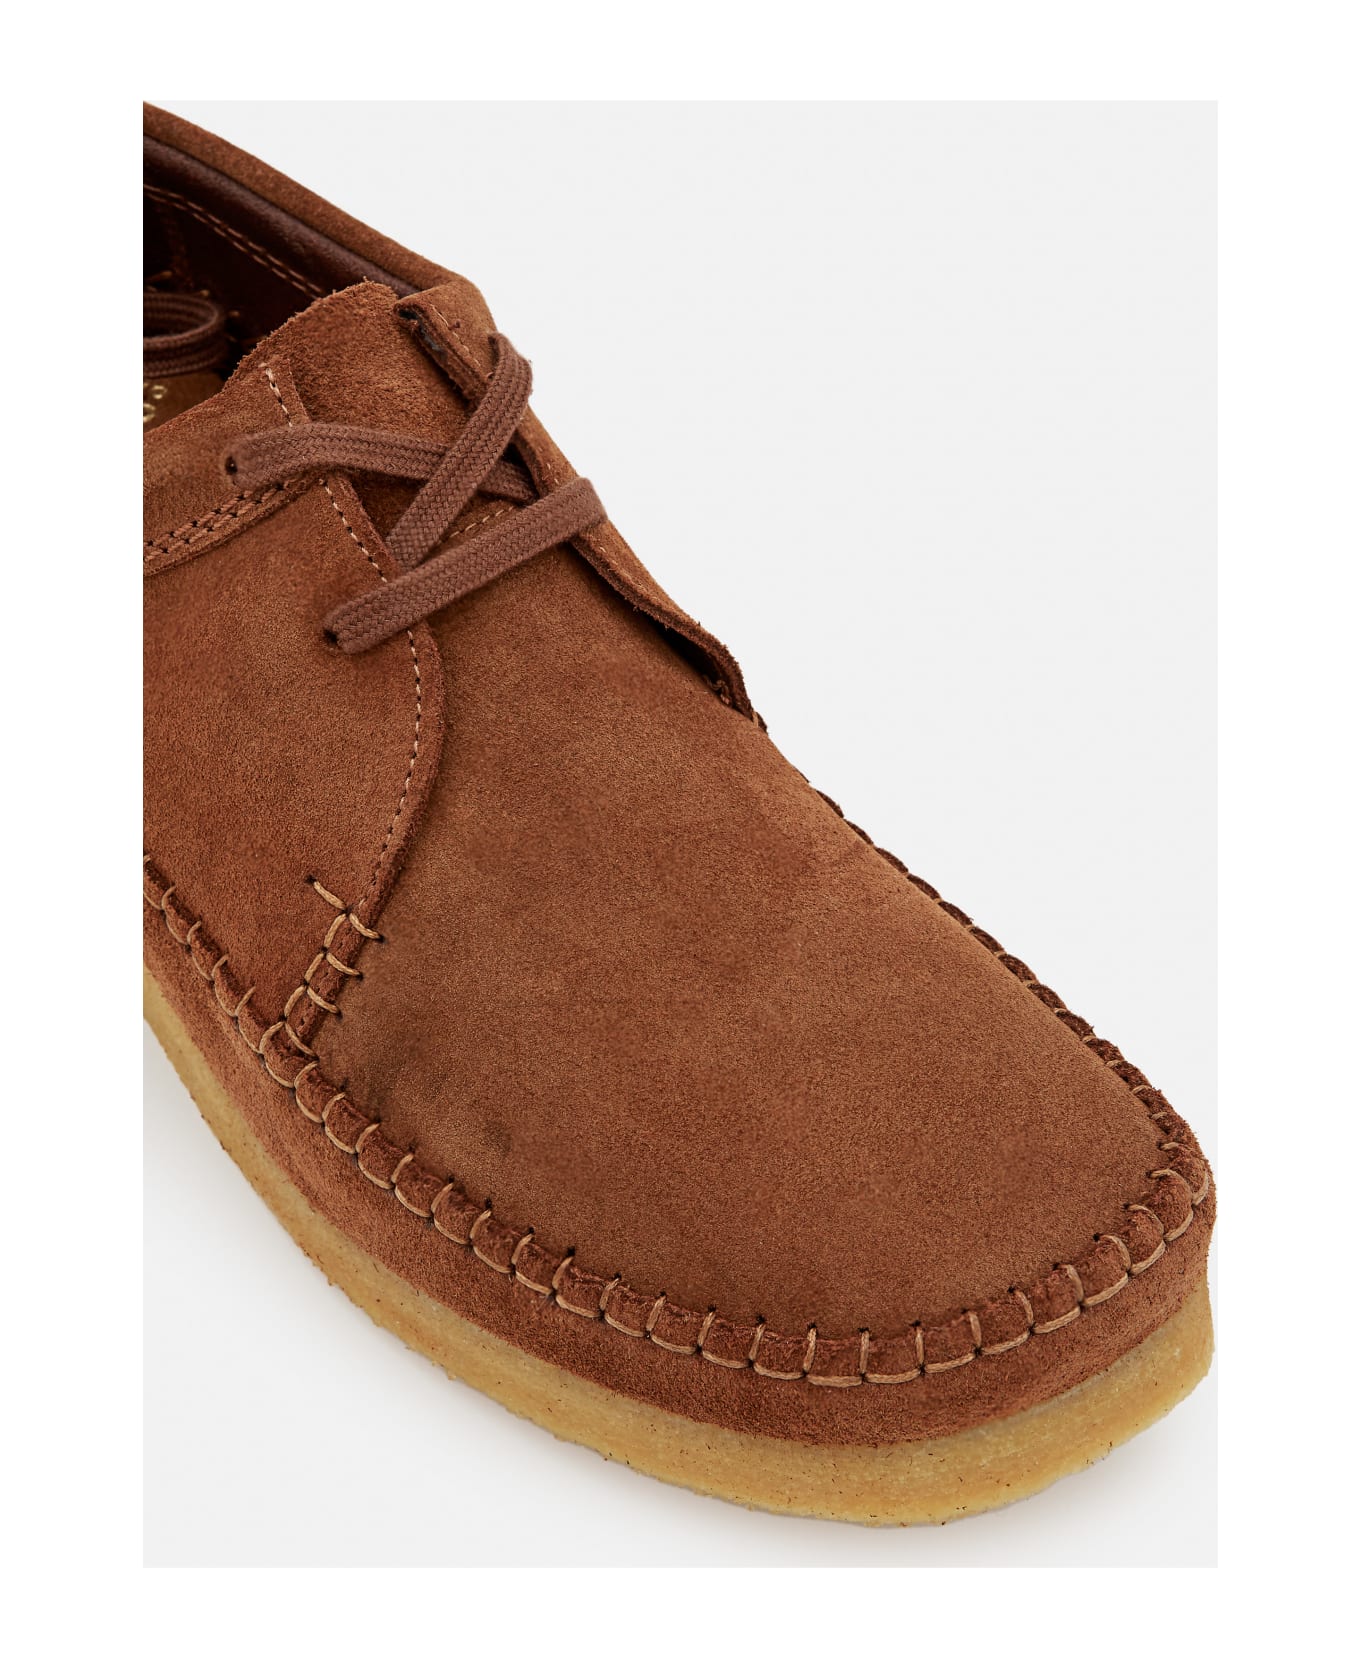 Clarks Weaver Suede Lace-up Shoes - Brown